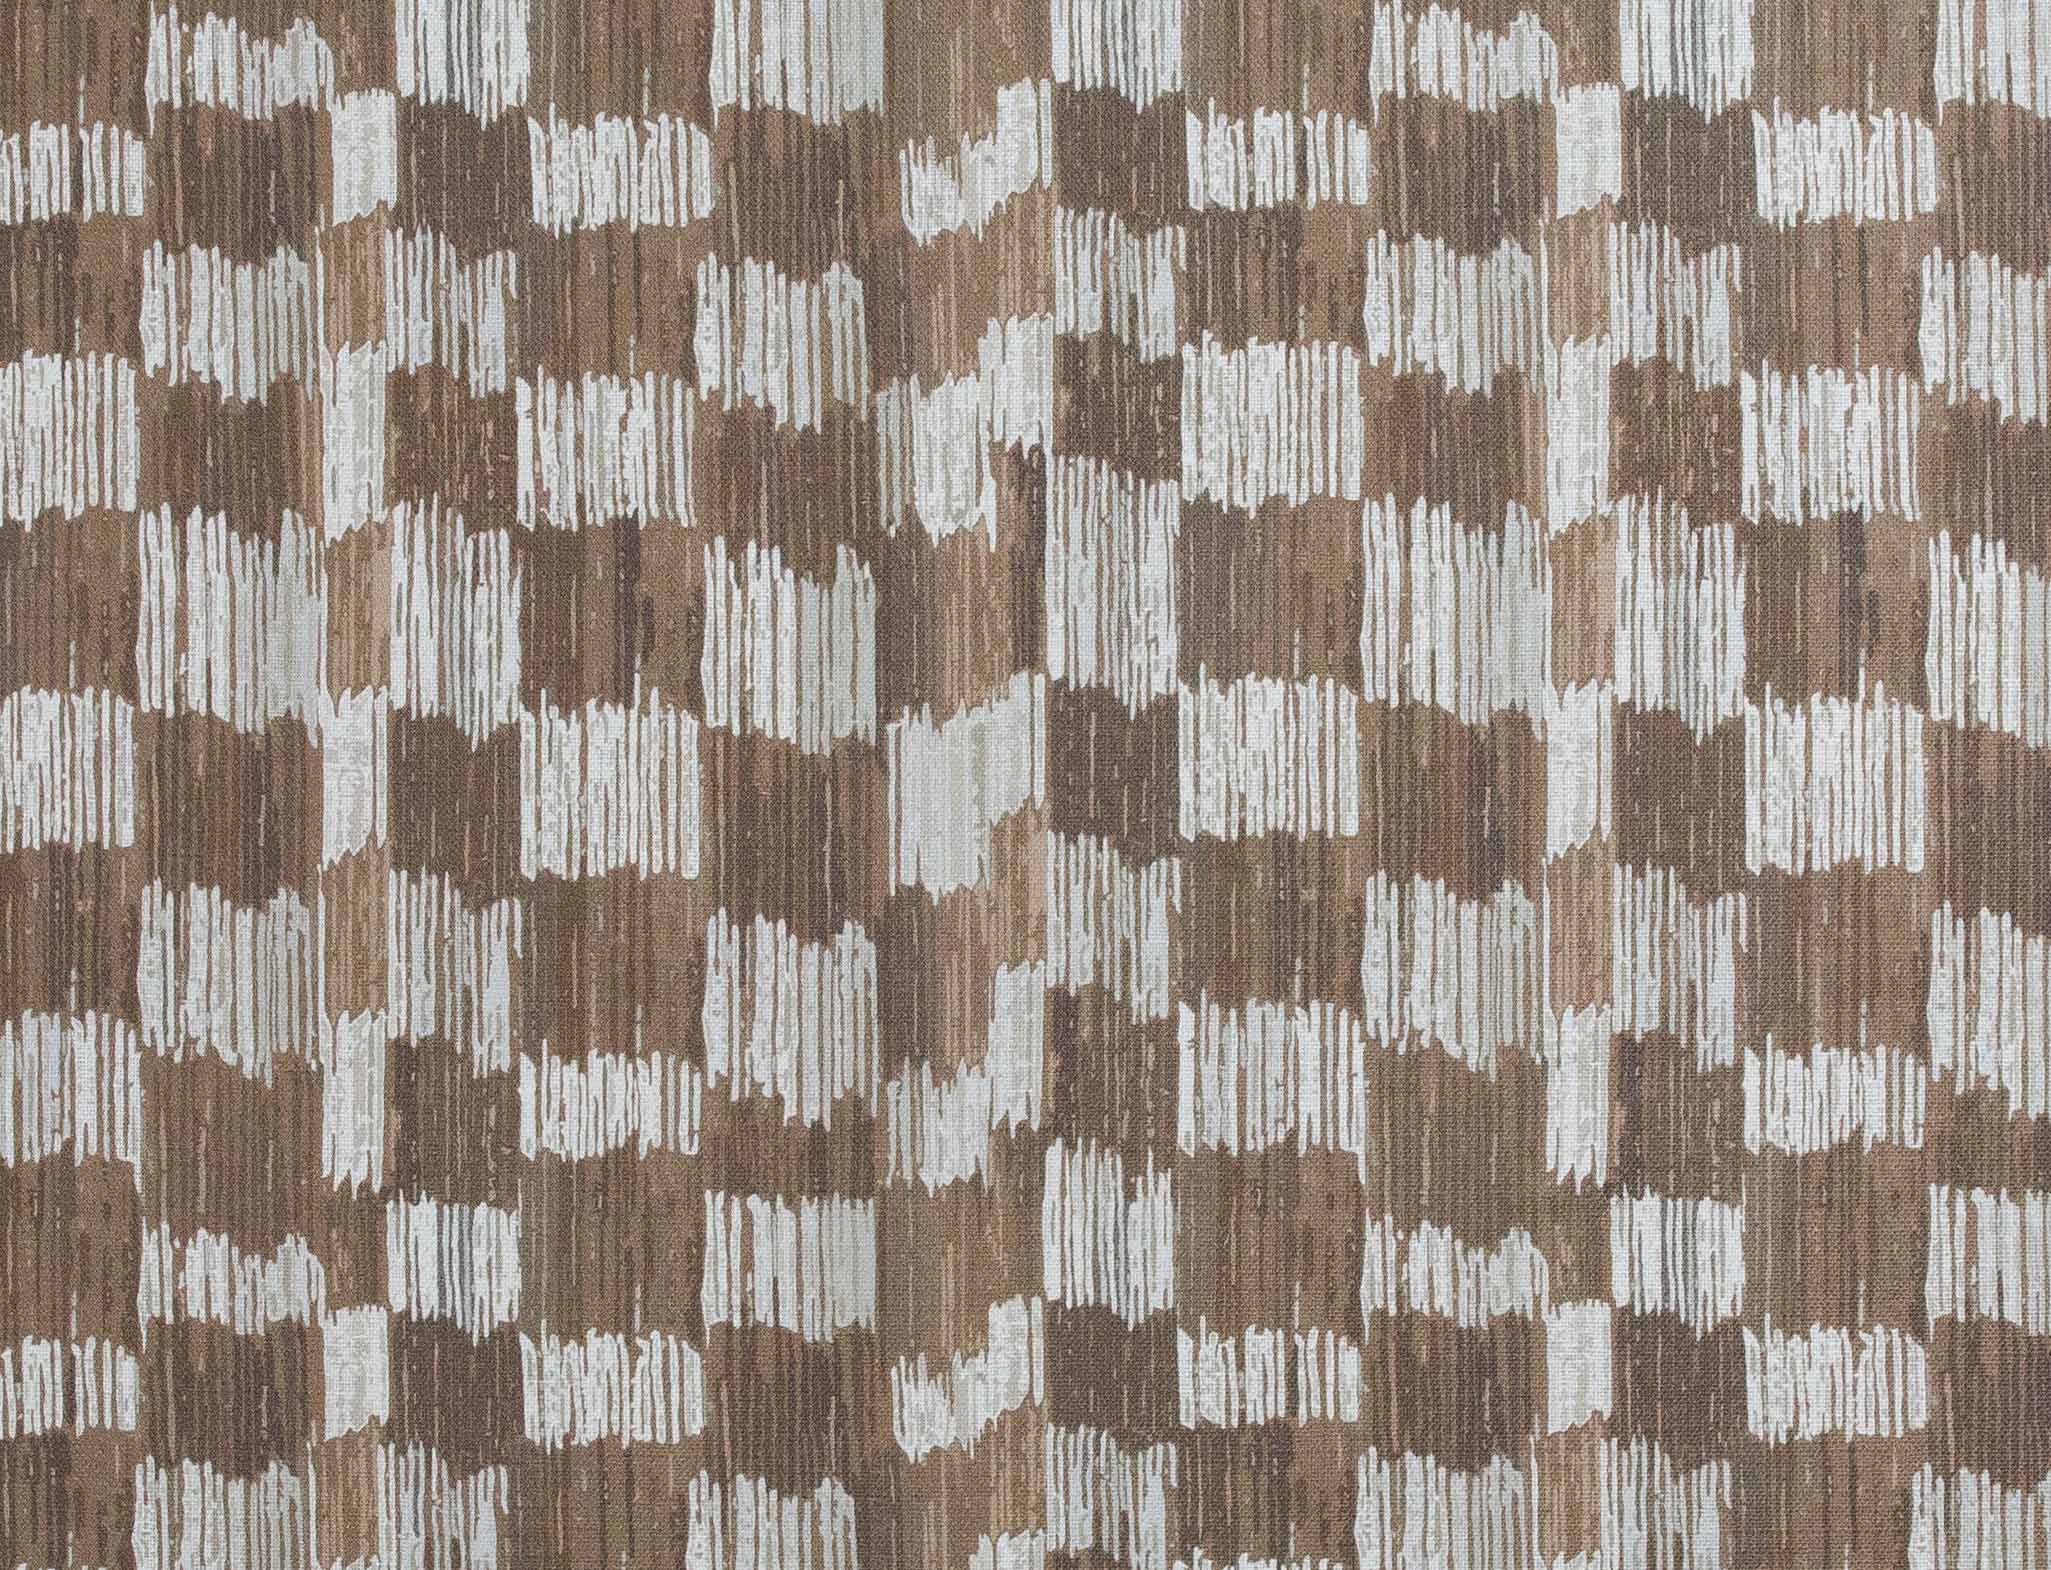 Detail of fabric in an abstract check print in shades of brown and gray.